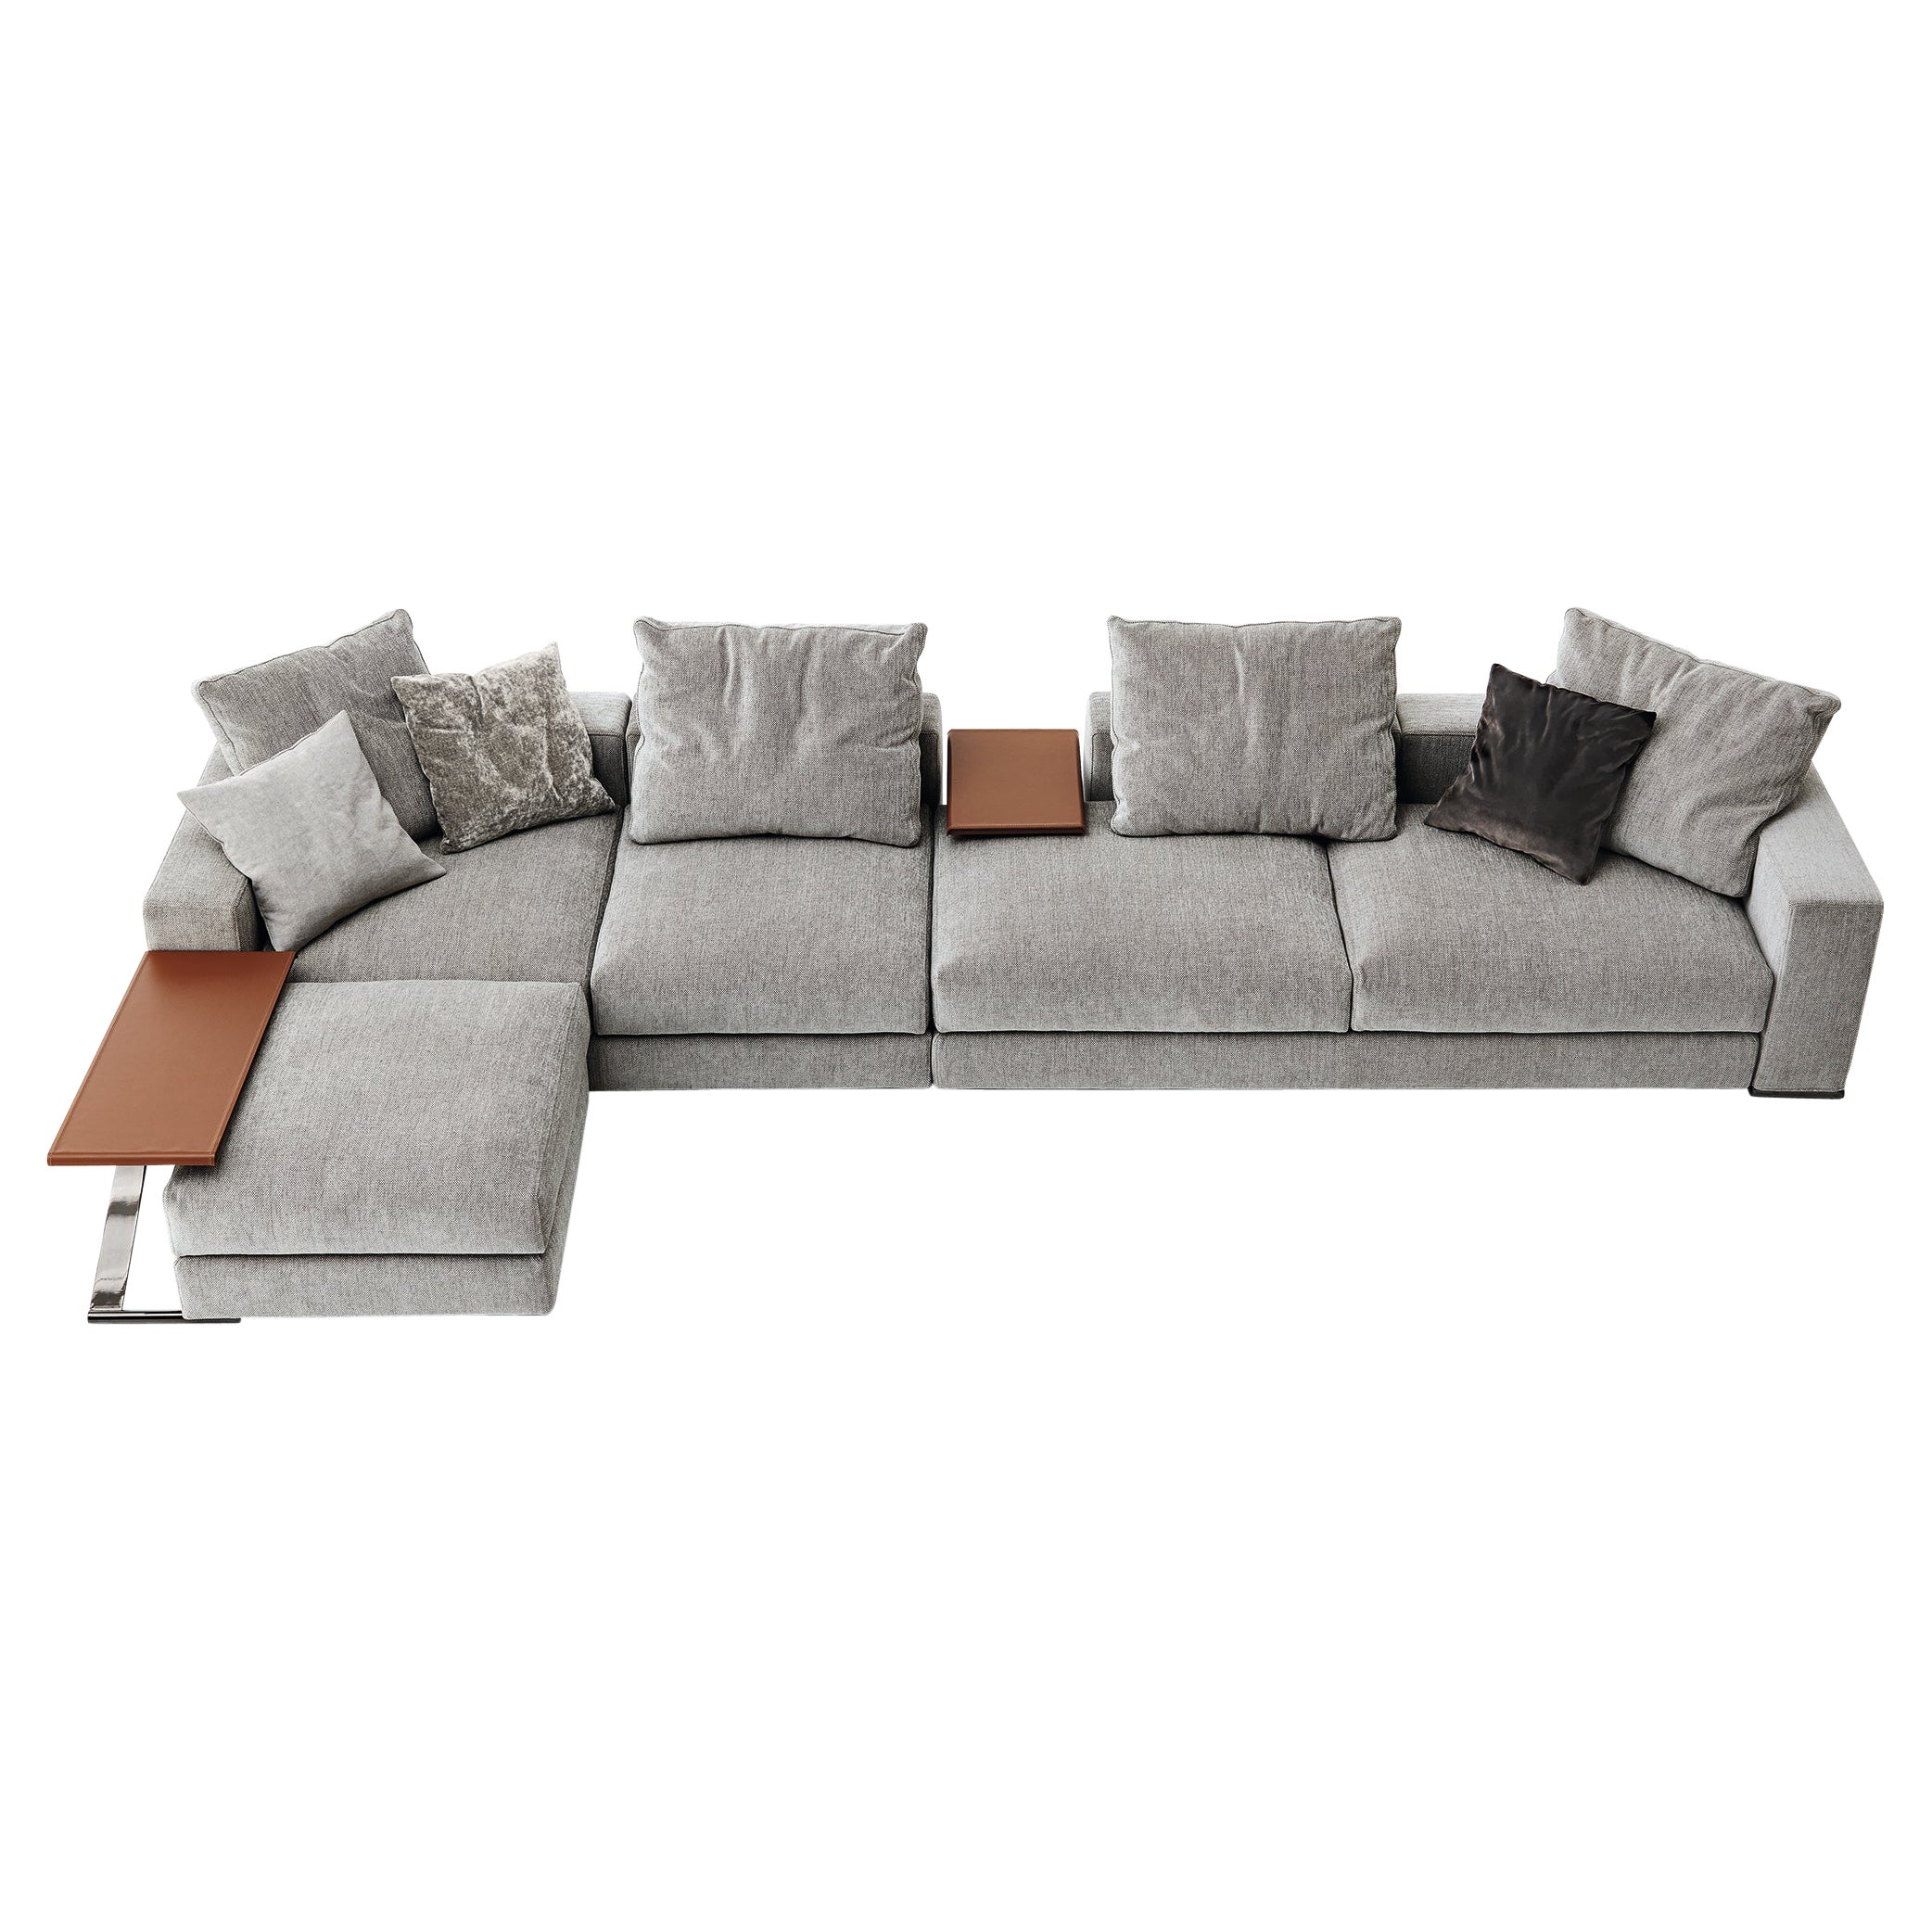 Ananta Class 15 Extra Large Sofa in Lusso Upholstery and Corten by Sergio Bicego